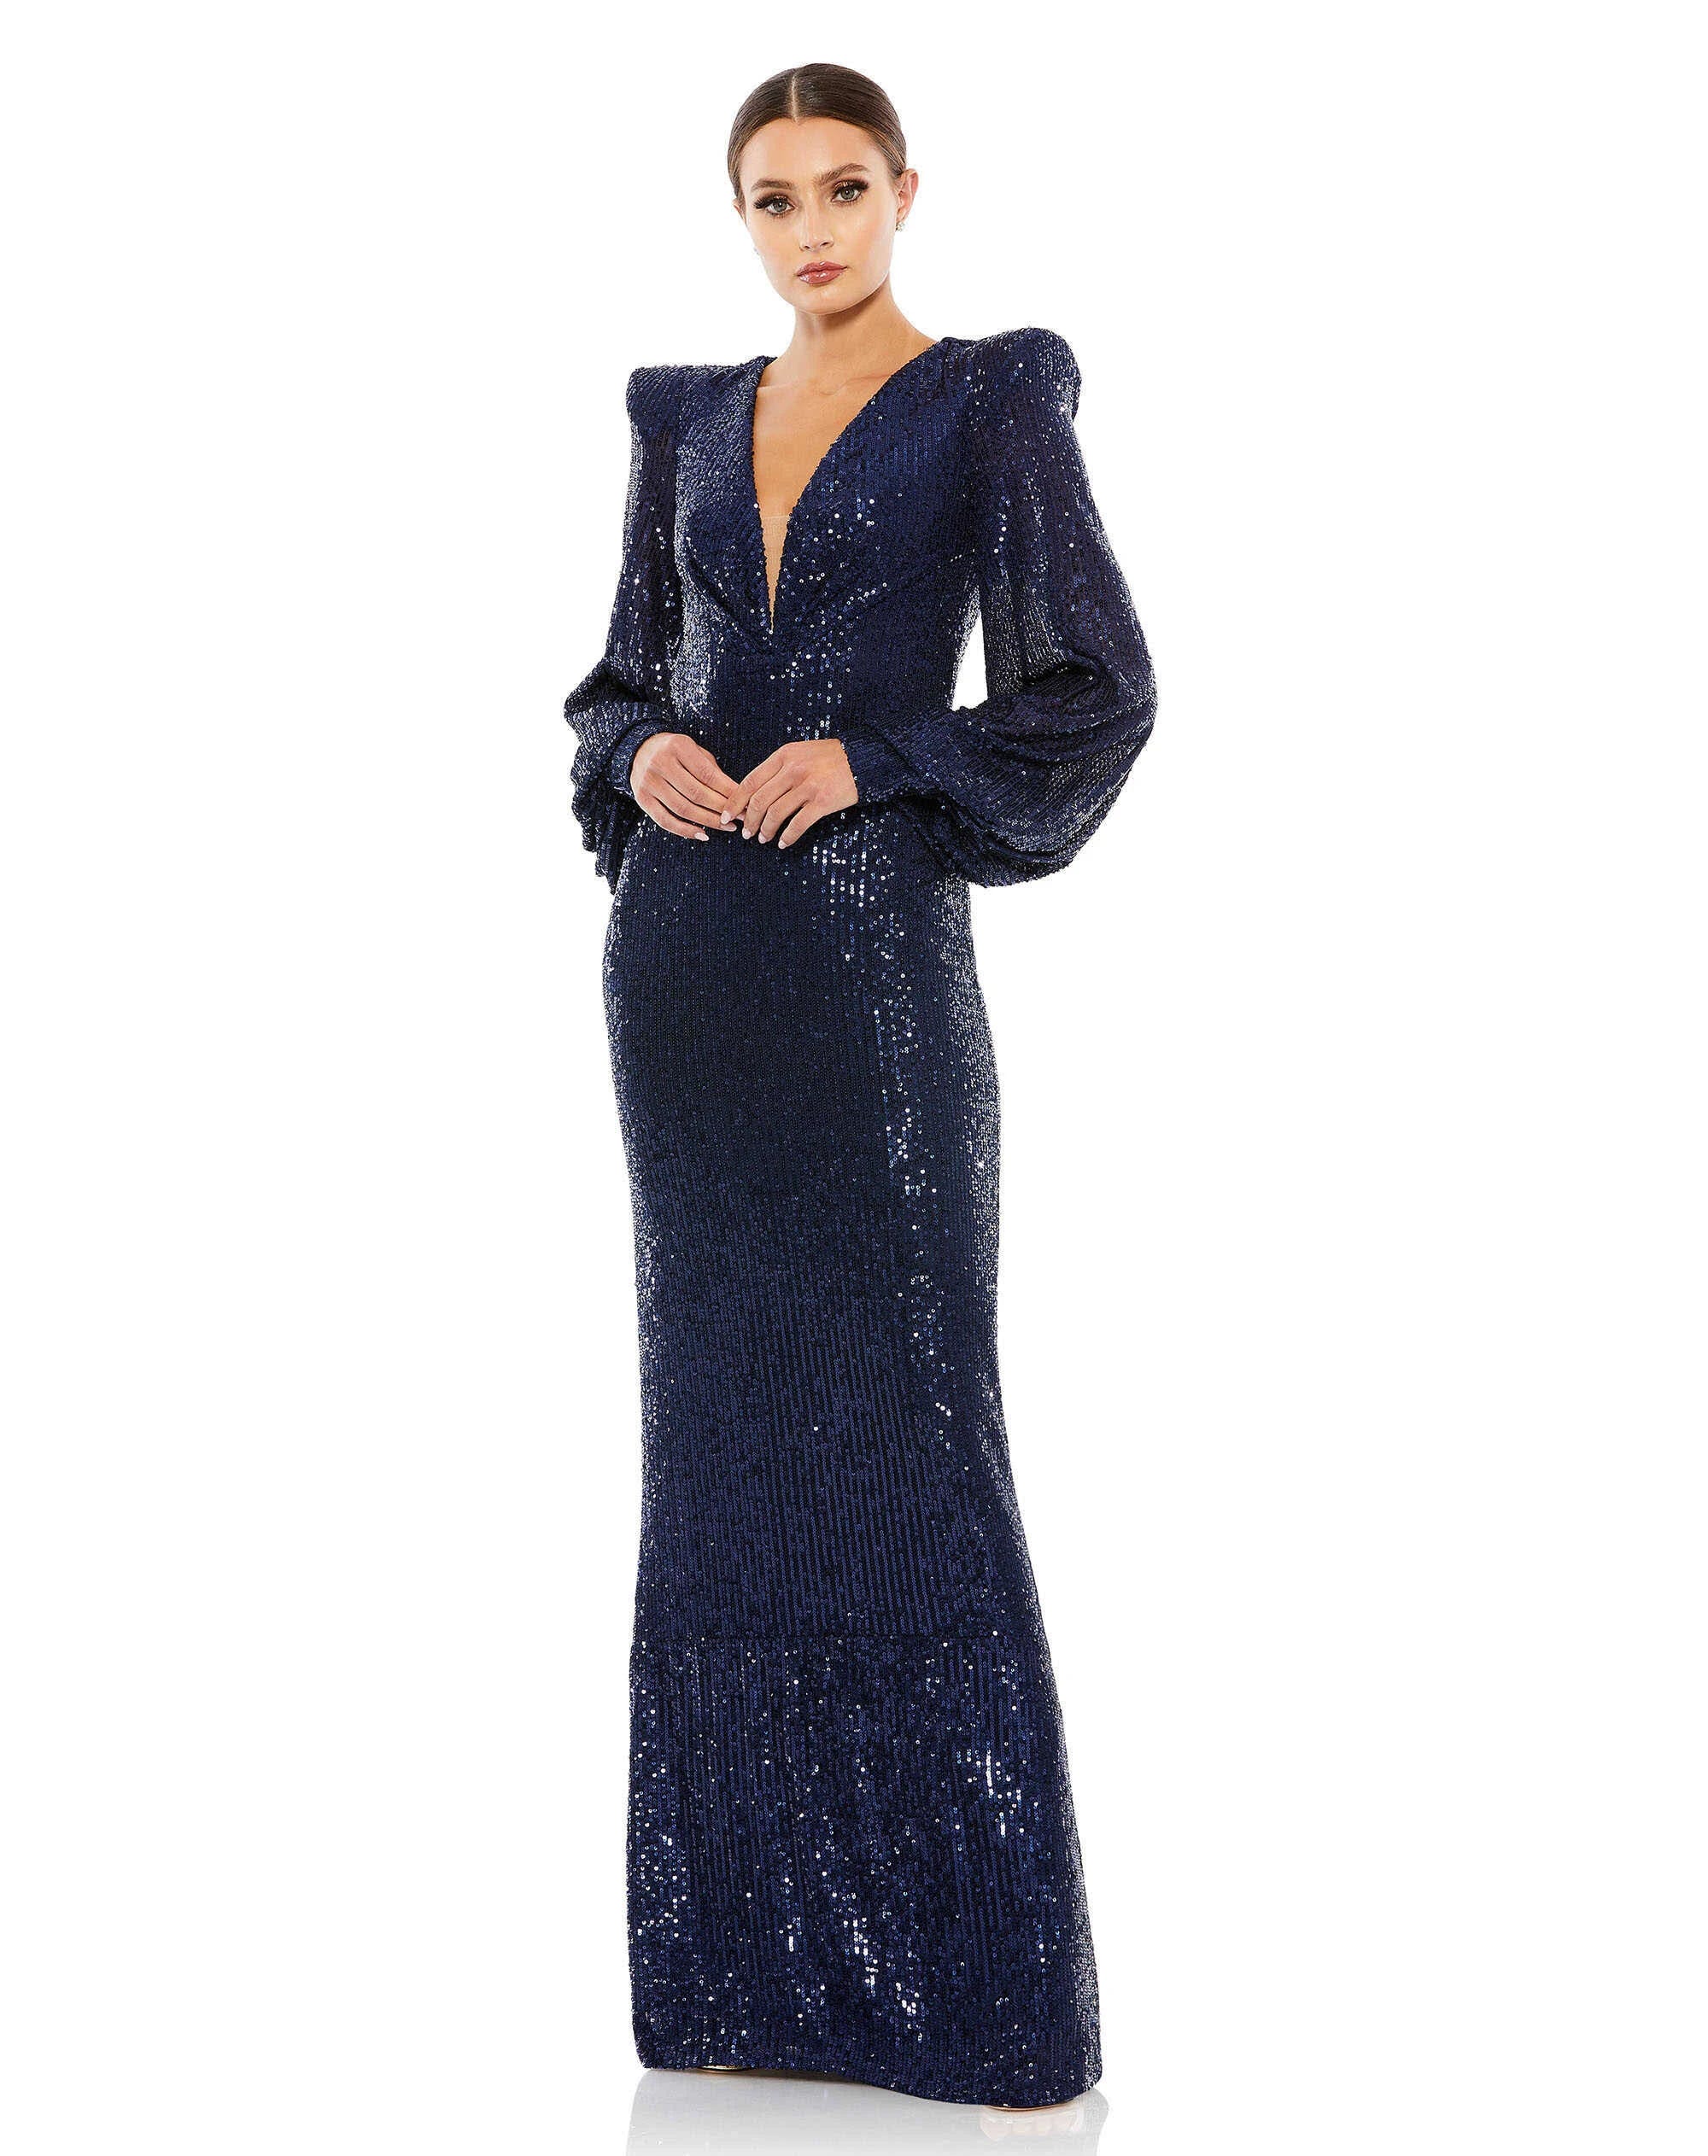 Stunning Sequined Plunge Gown with Long Sleeves | Image